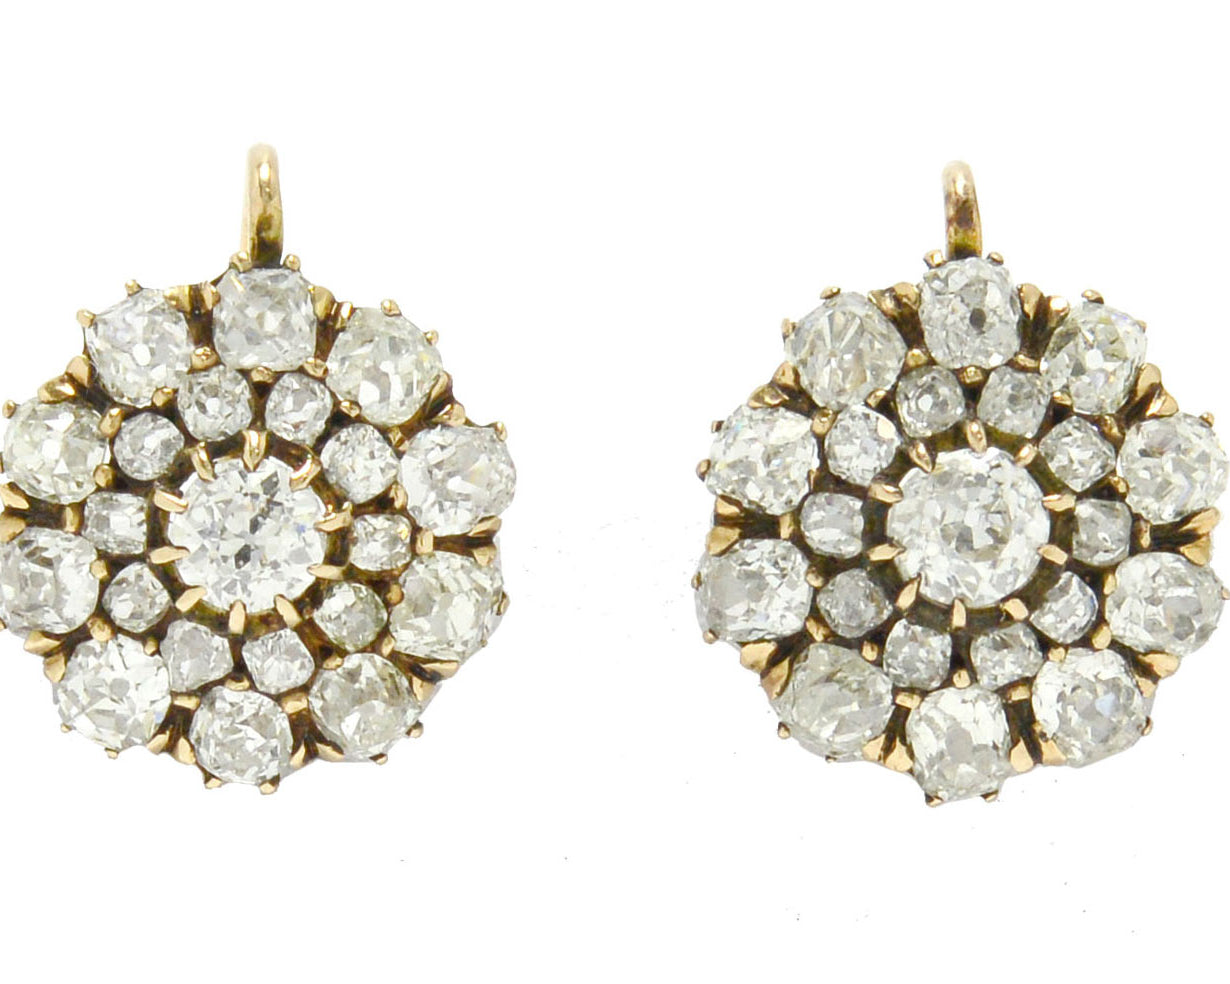 Late 1800s, antique Victorian diamond cluster earrings with lever back fastening.